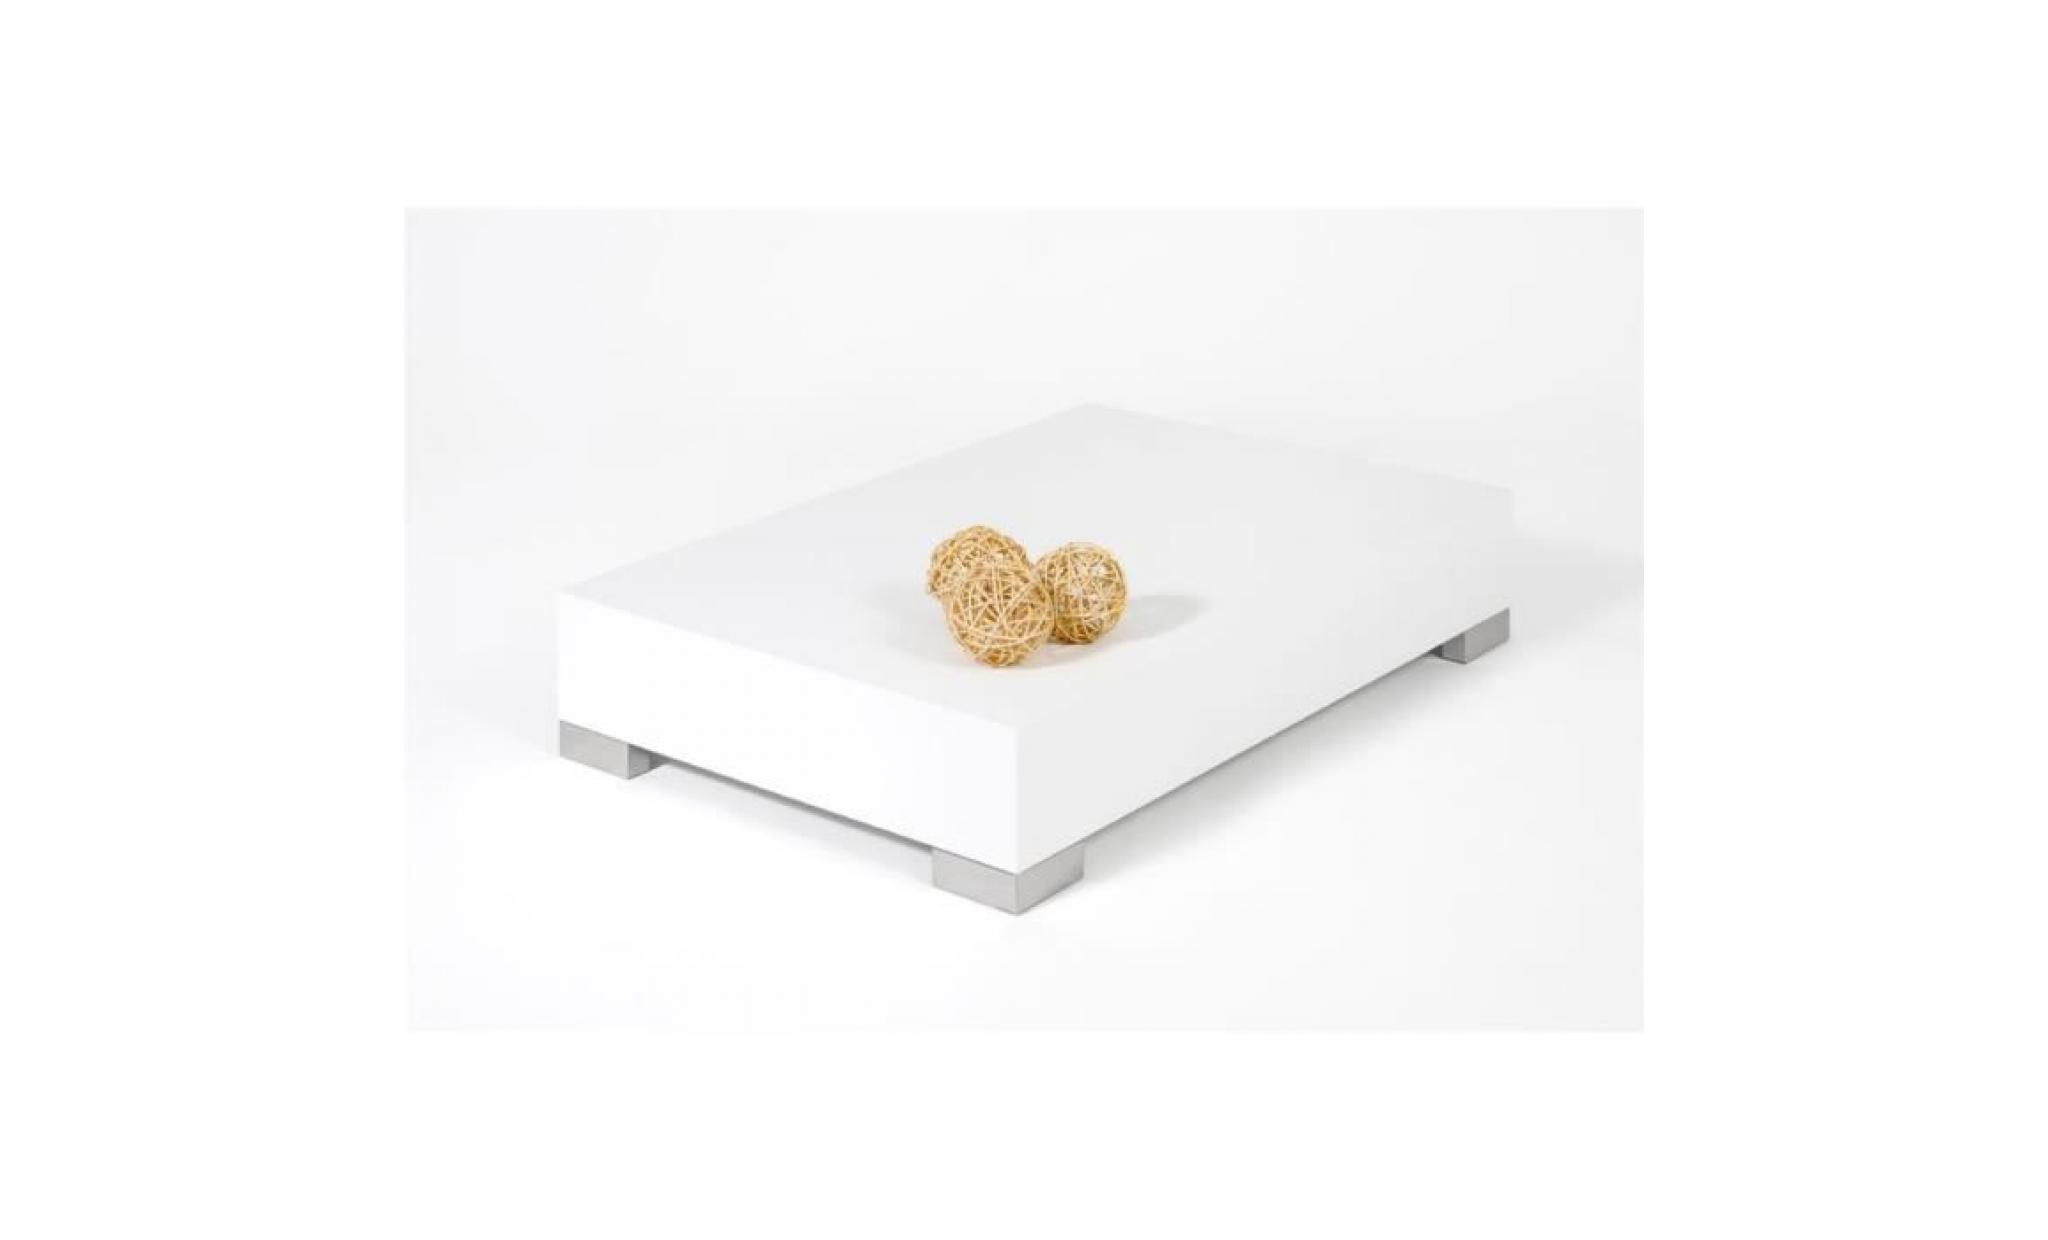 mobilifiver table basse, icube 90, frêne blanc, 90 x 60 x 18 cm, mélaminé/acier inox satiné, made in italy